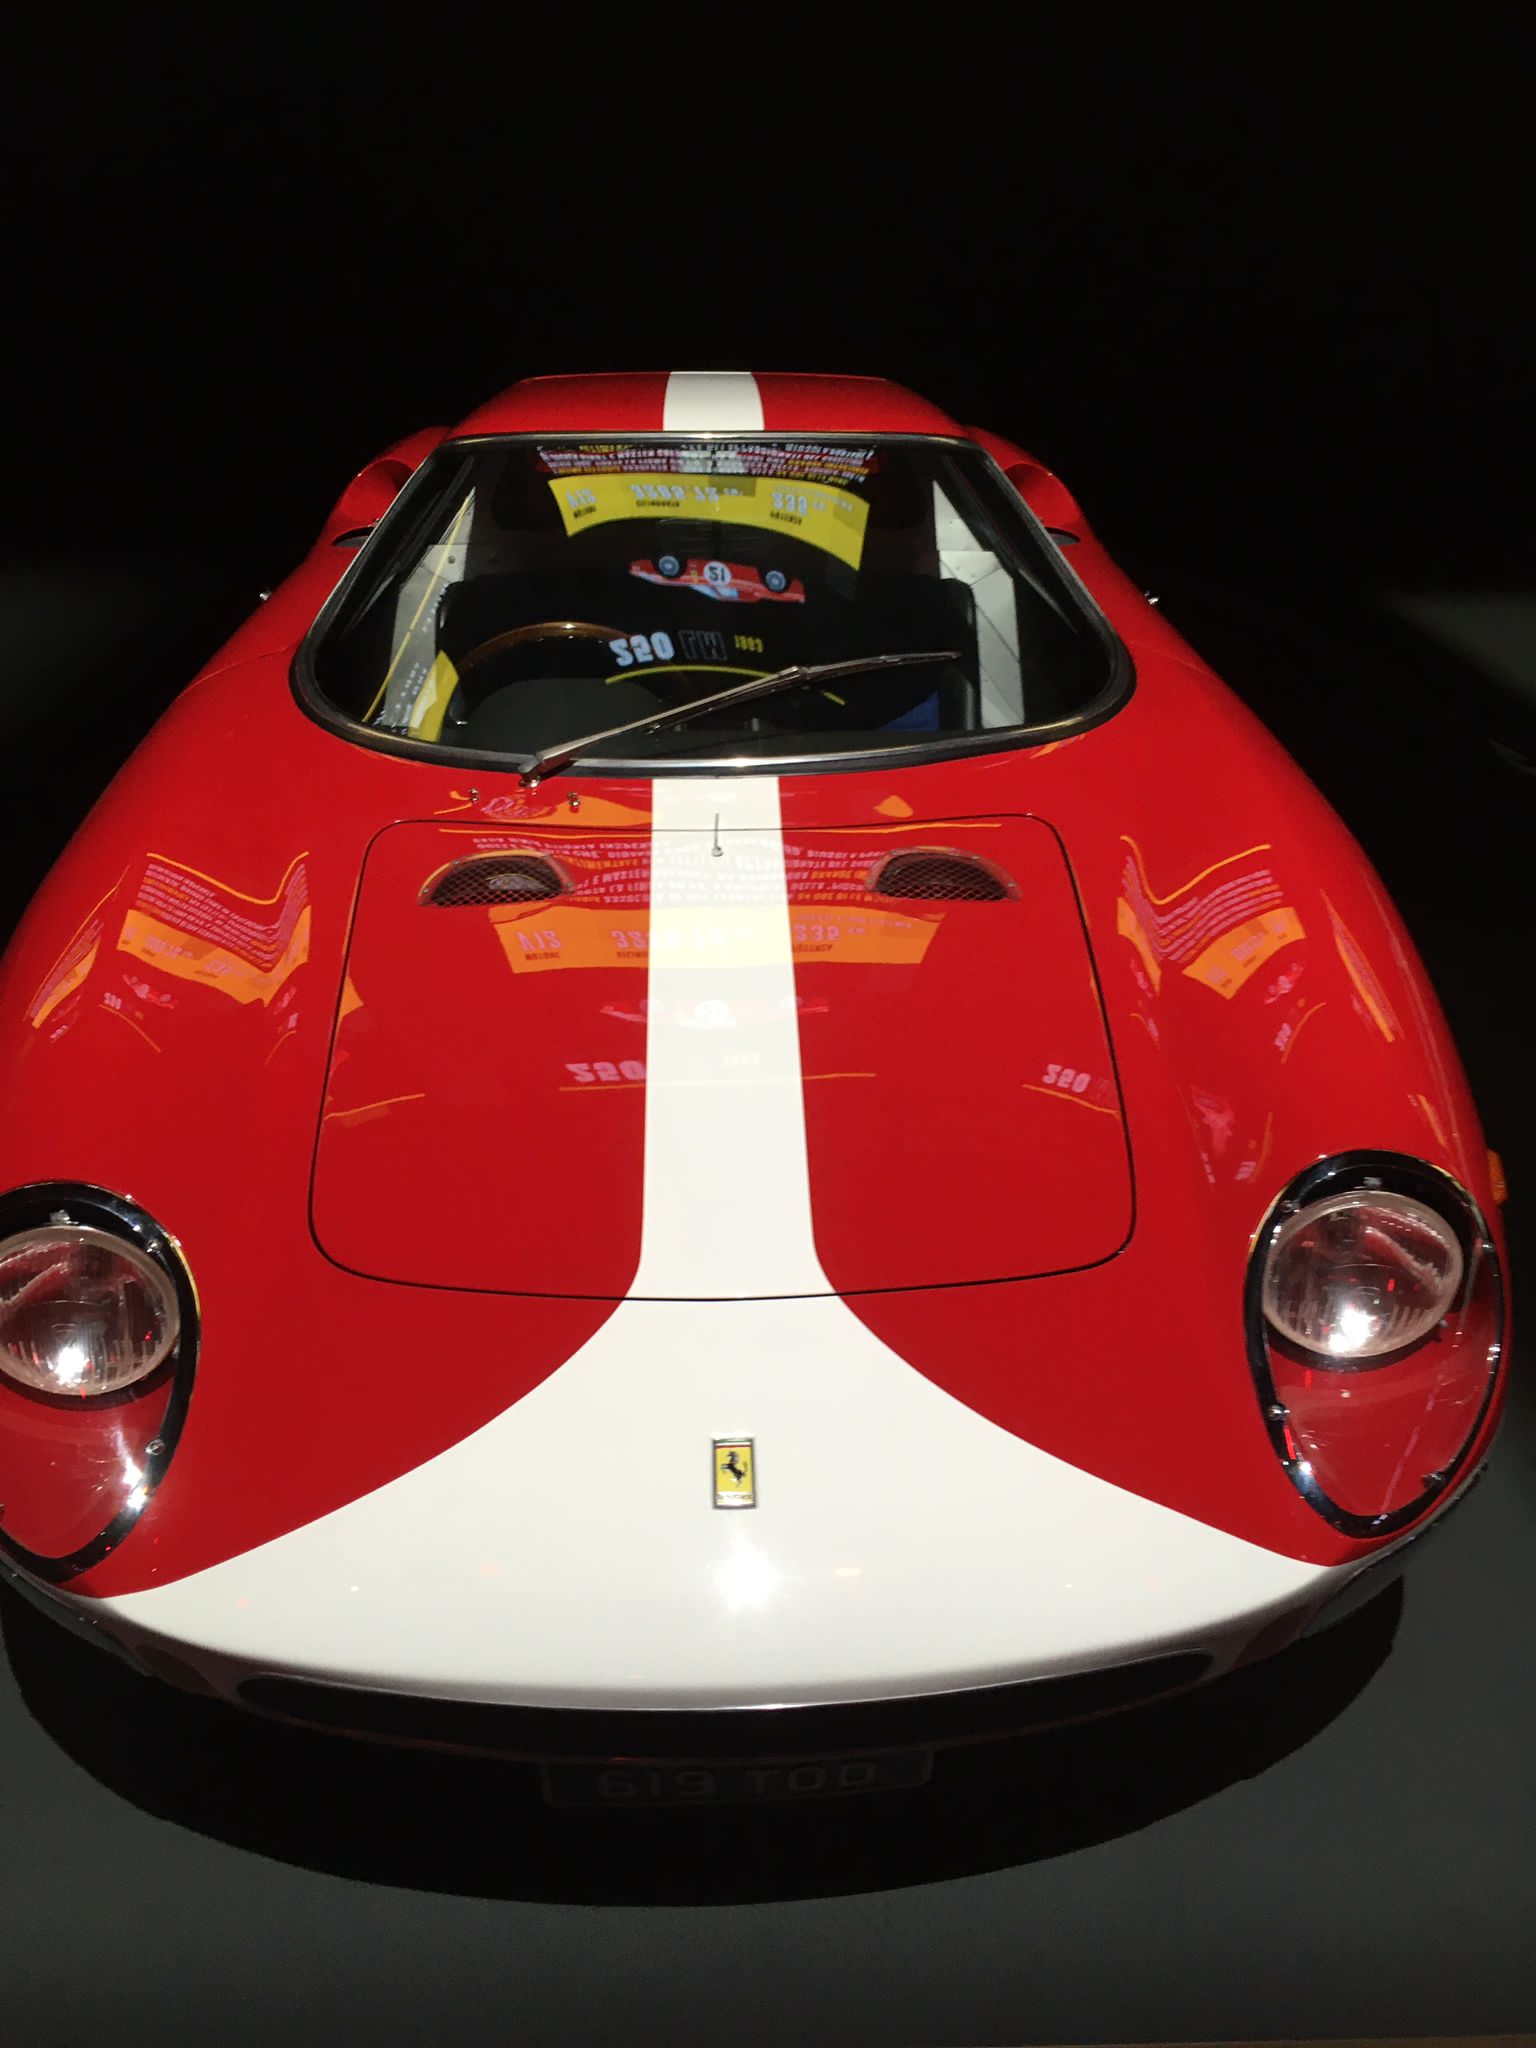 A vintage red and white Ferrari.